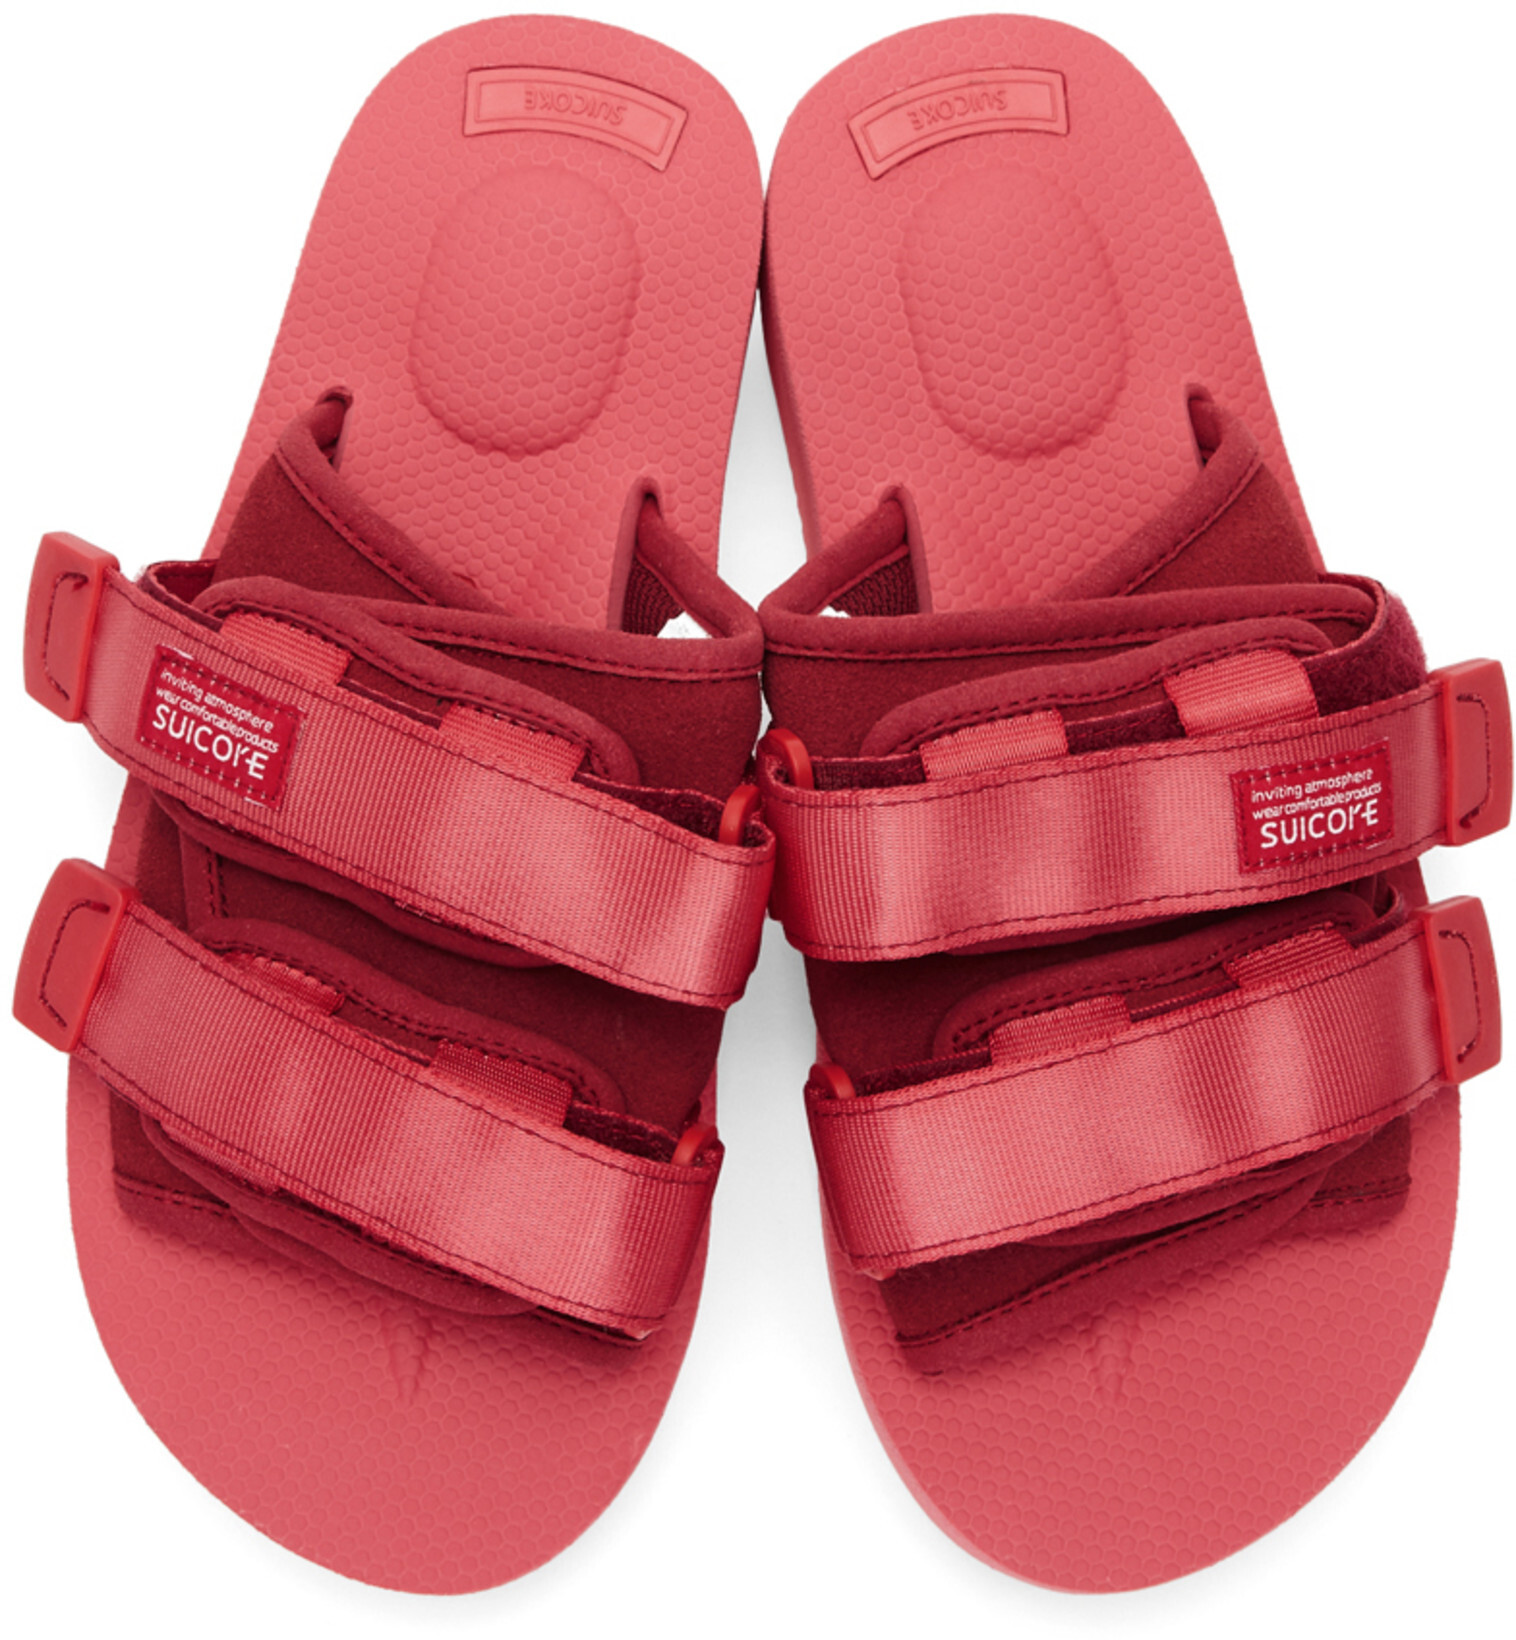 60% Suicoke Slides and Sandals — A Sneaker Life